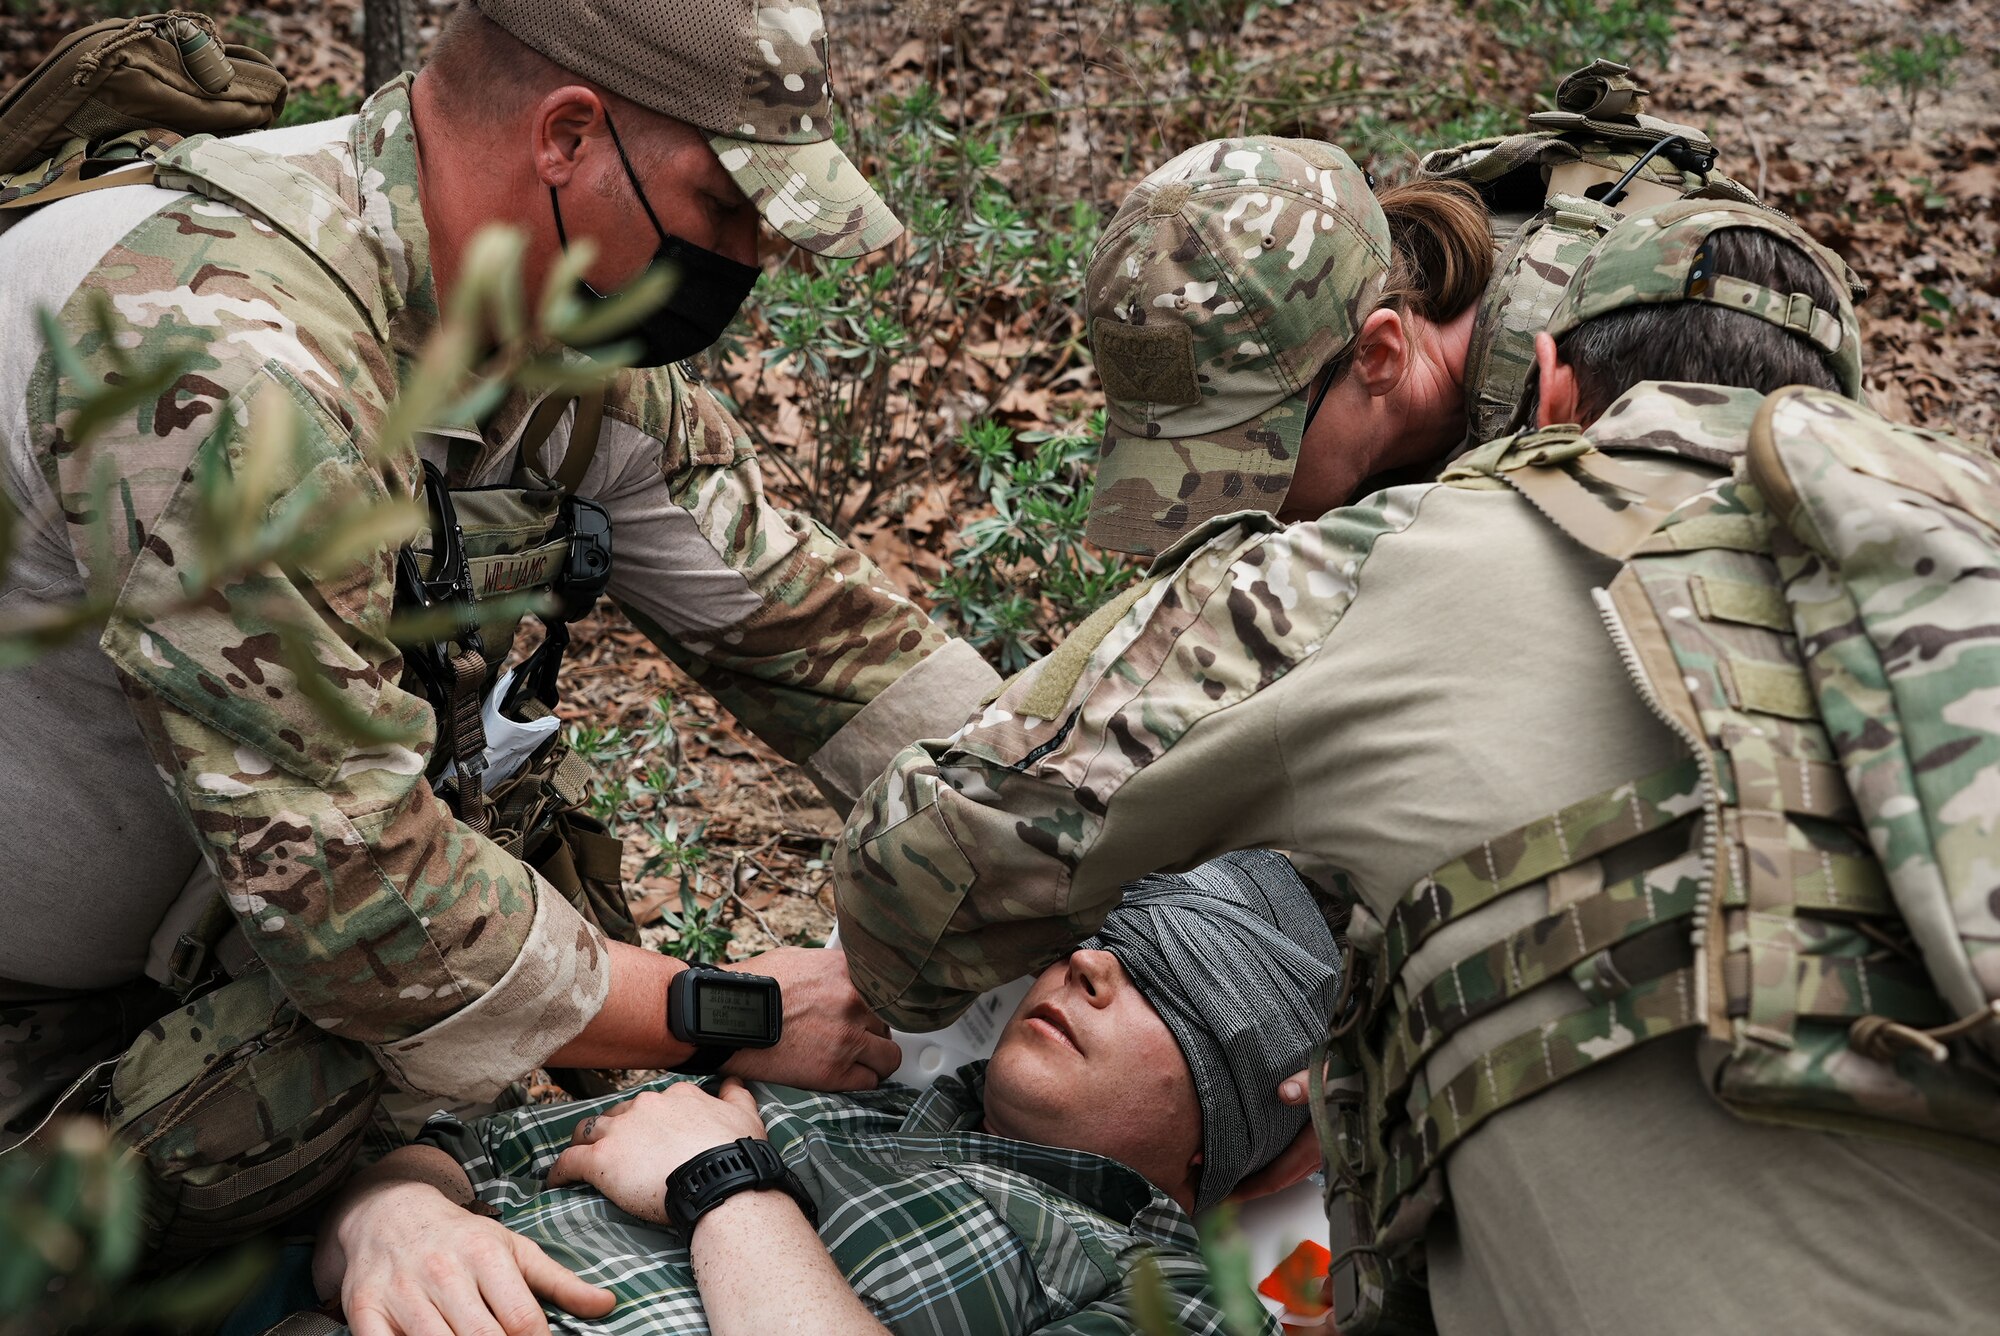 Three Airmen provide medical care to a casualty.